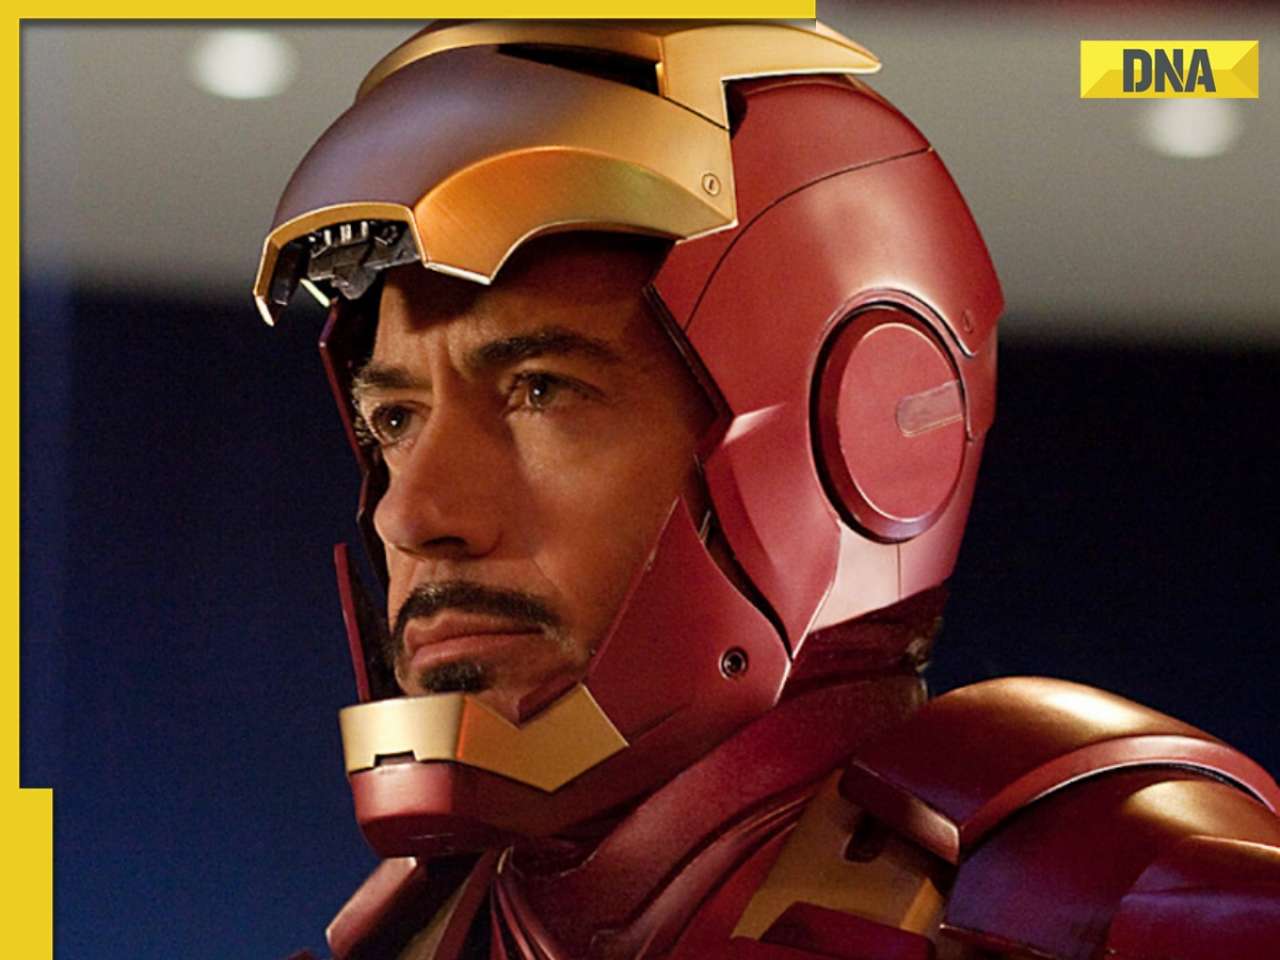 Not Robert Downey Jr, this superstar was first choice for Iron Man in Marvel Cinematic Universe, he refused because...